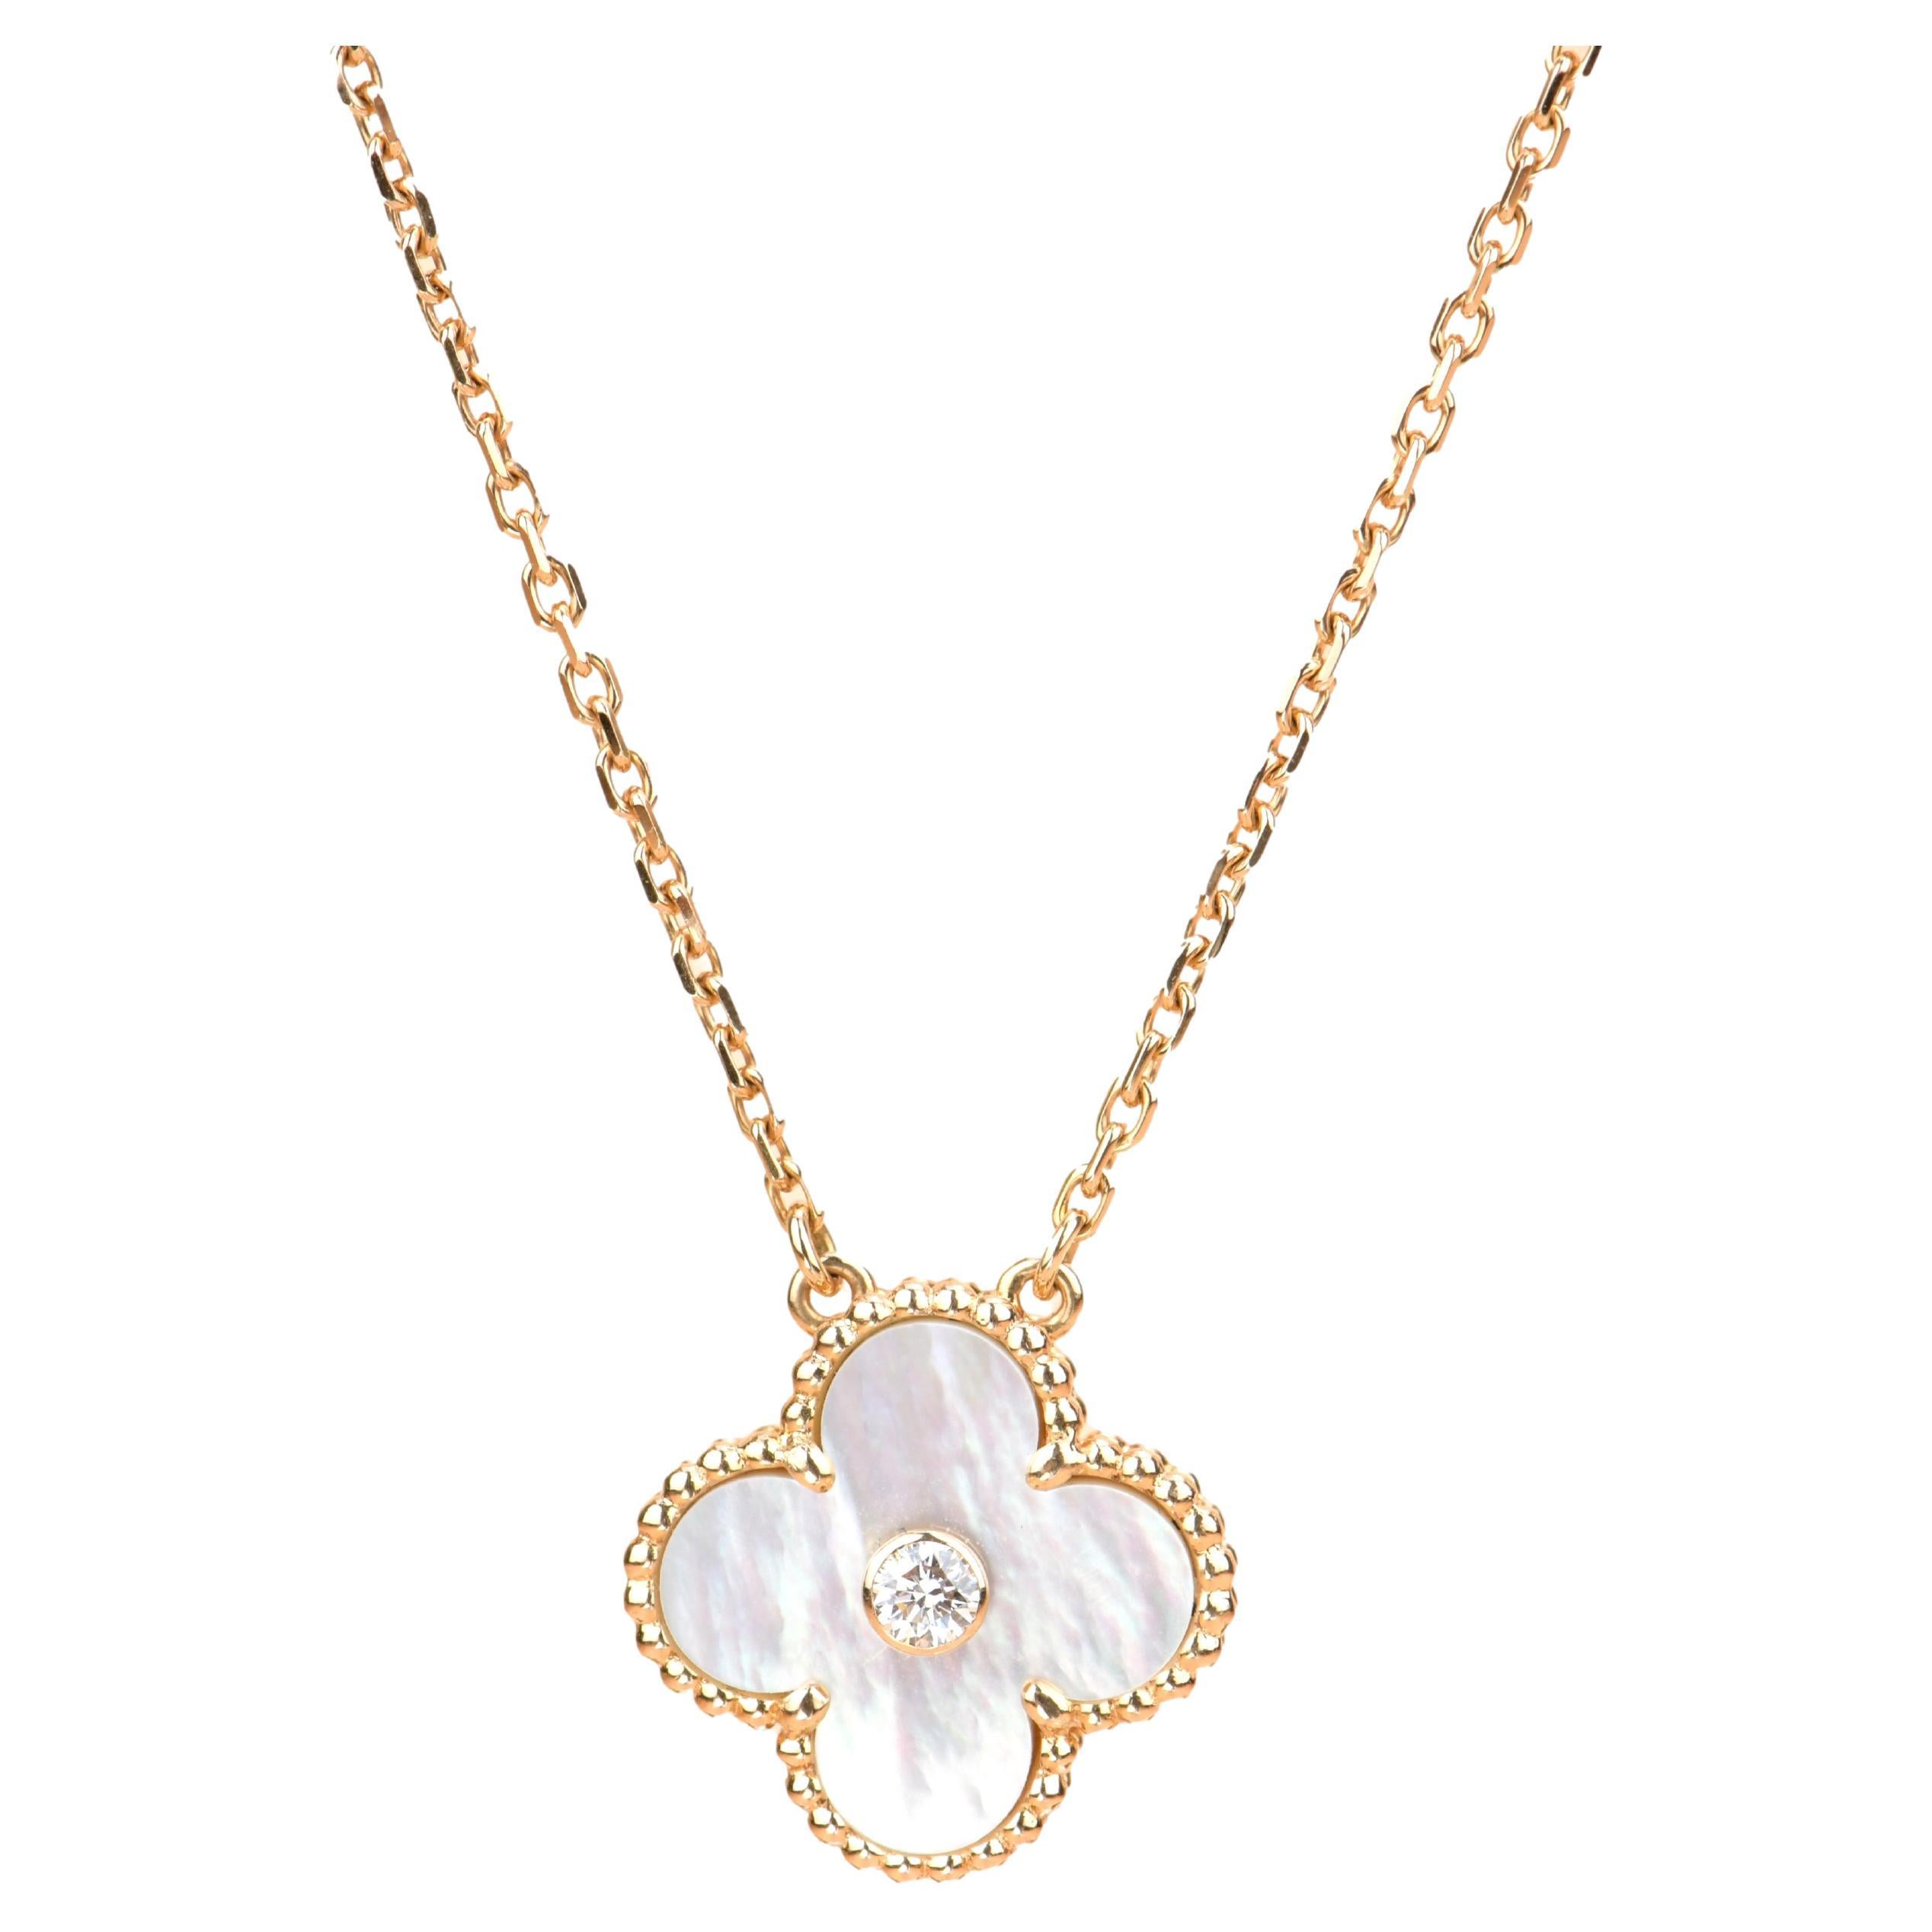 Van Cleef & Arpels Diamond Mother of Pearl Limited Edition Alhambra Necklace